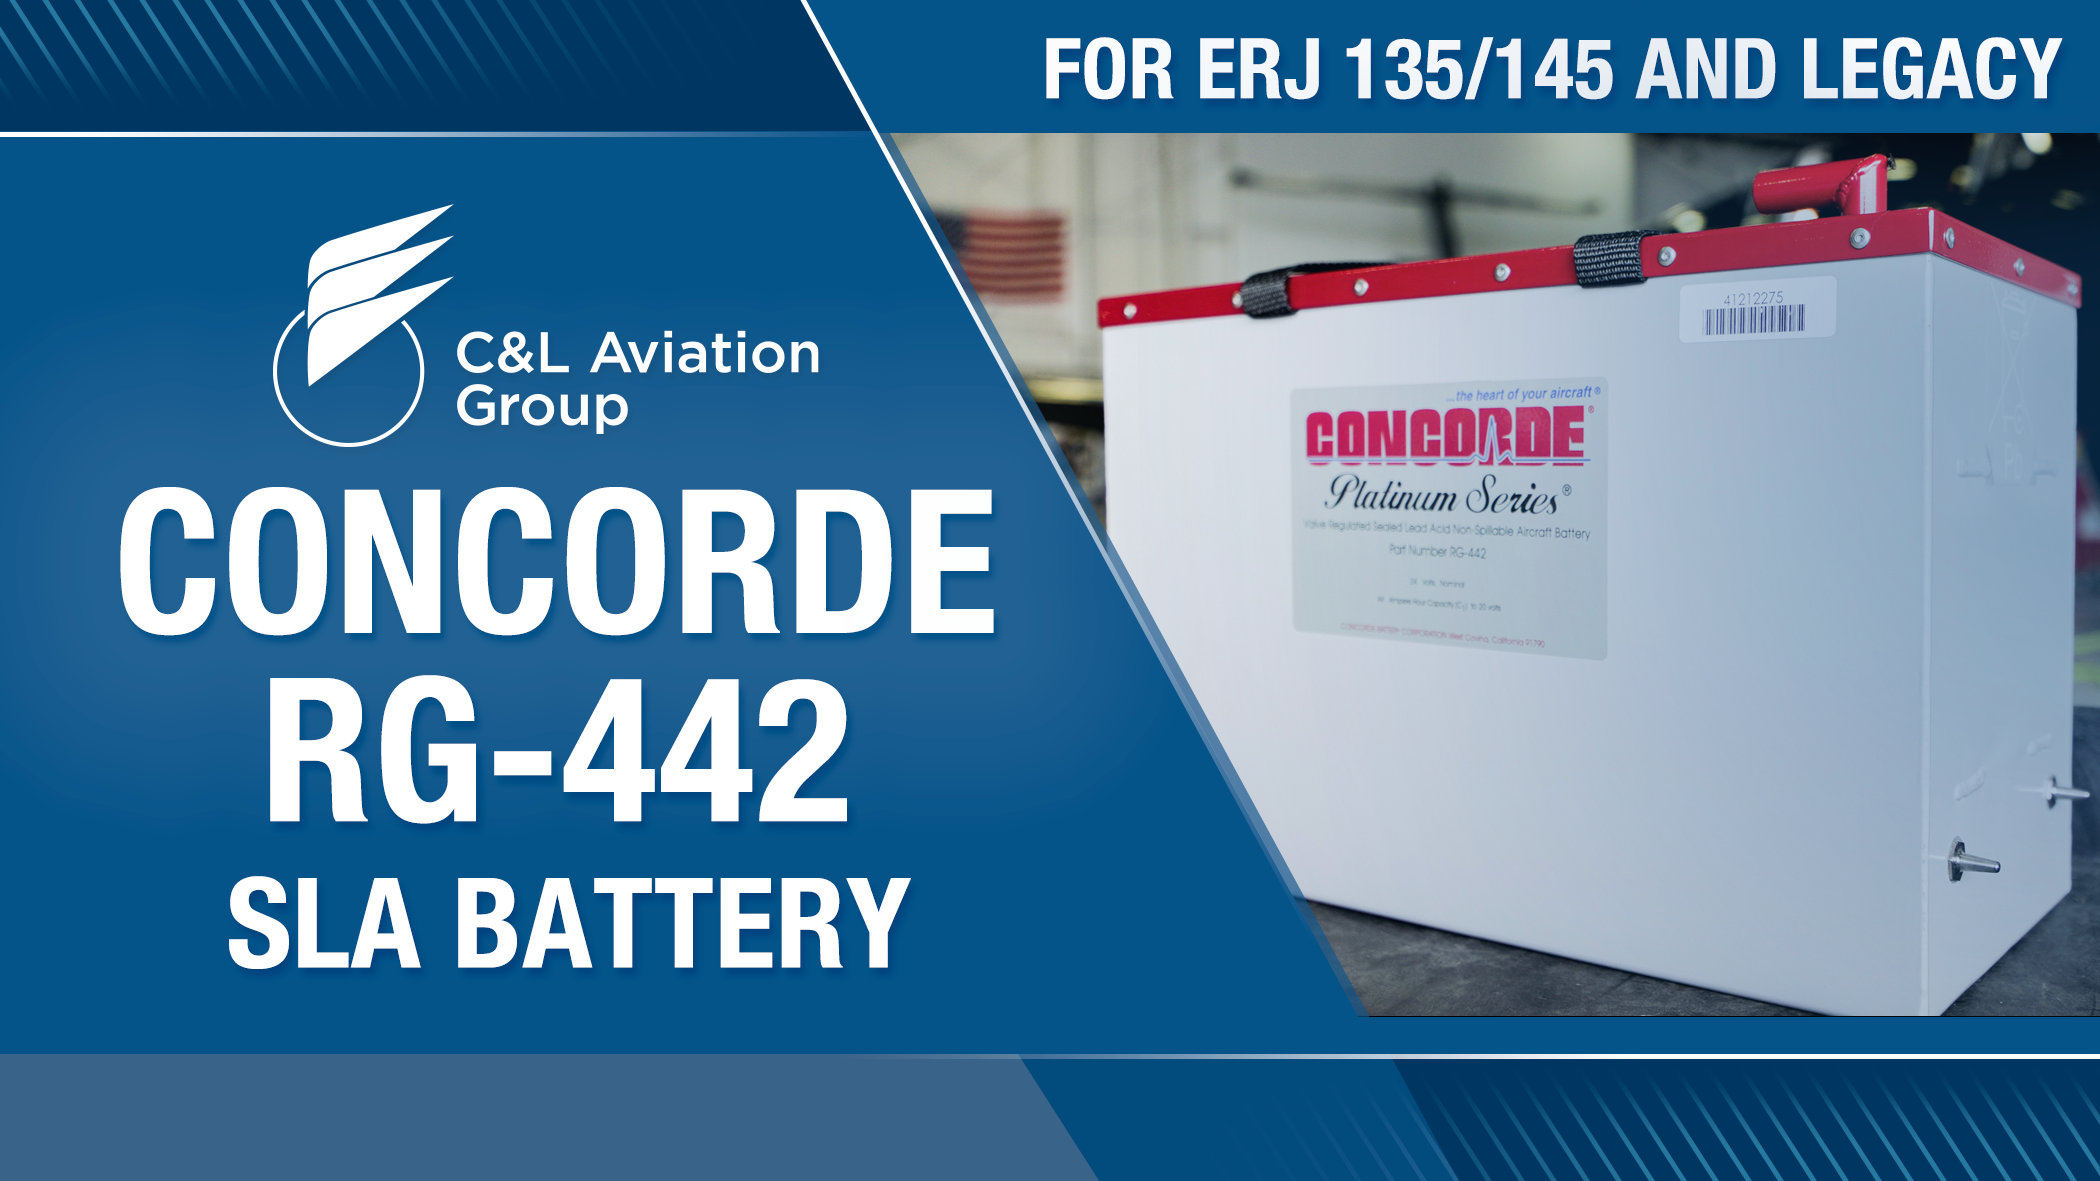 Concorde SLA Battery for the Embraer ERJ 135/145 & Legacy Aircraft